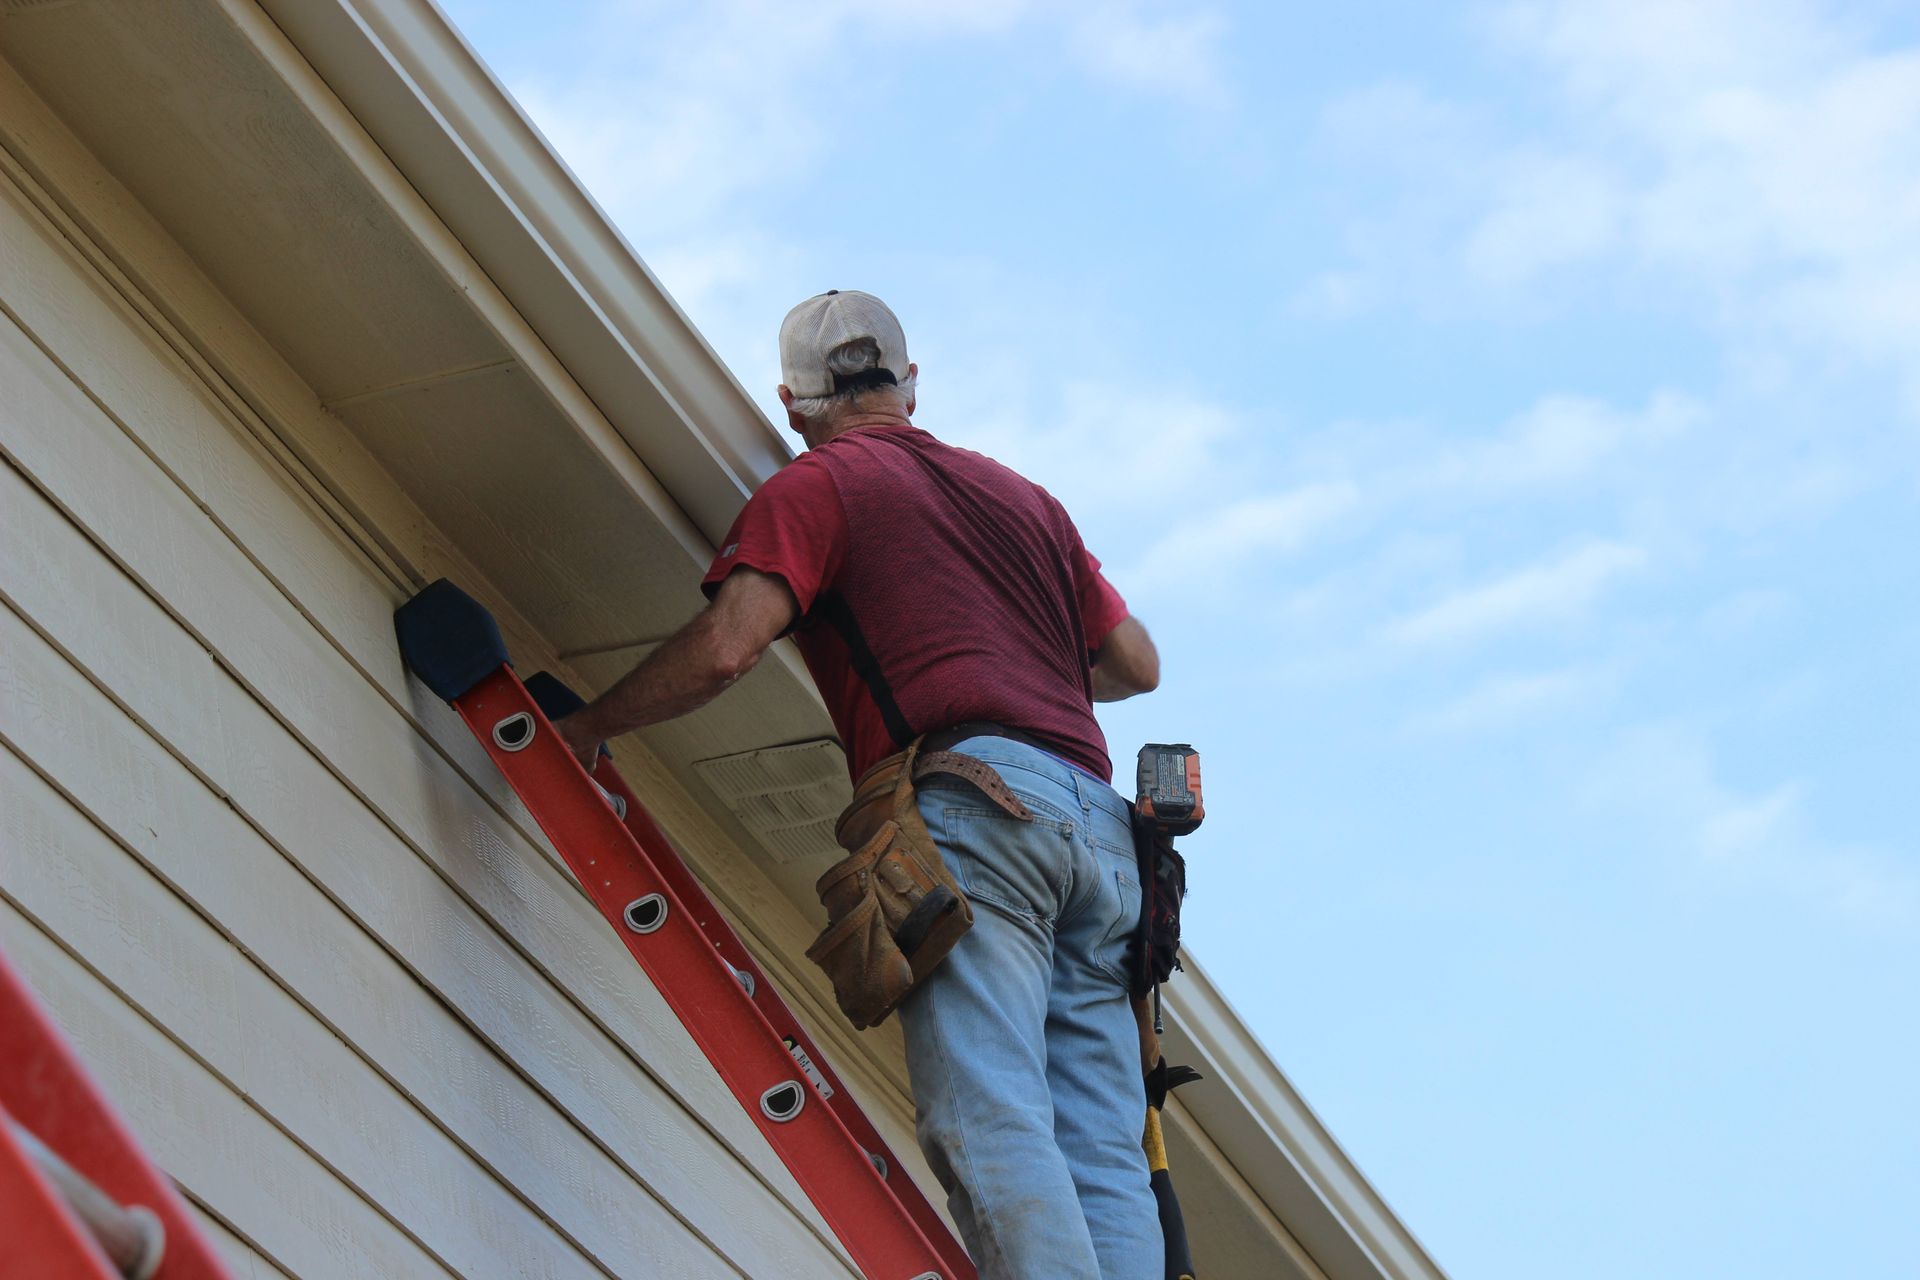 A man is standing on a ladder on the side of a house